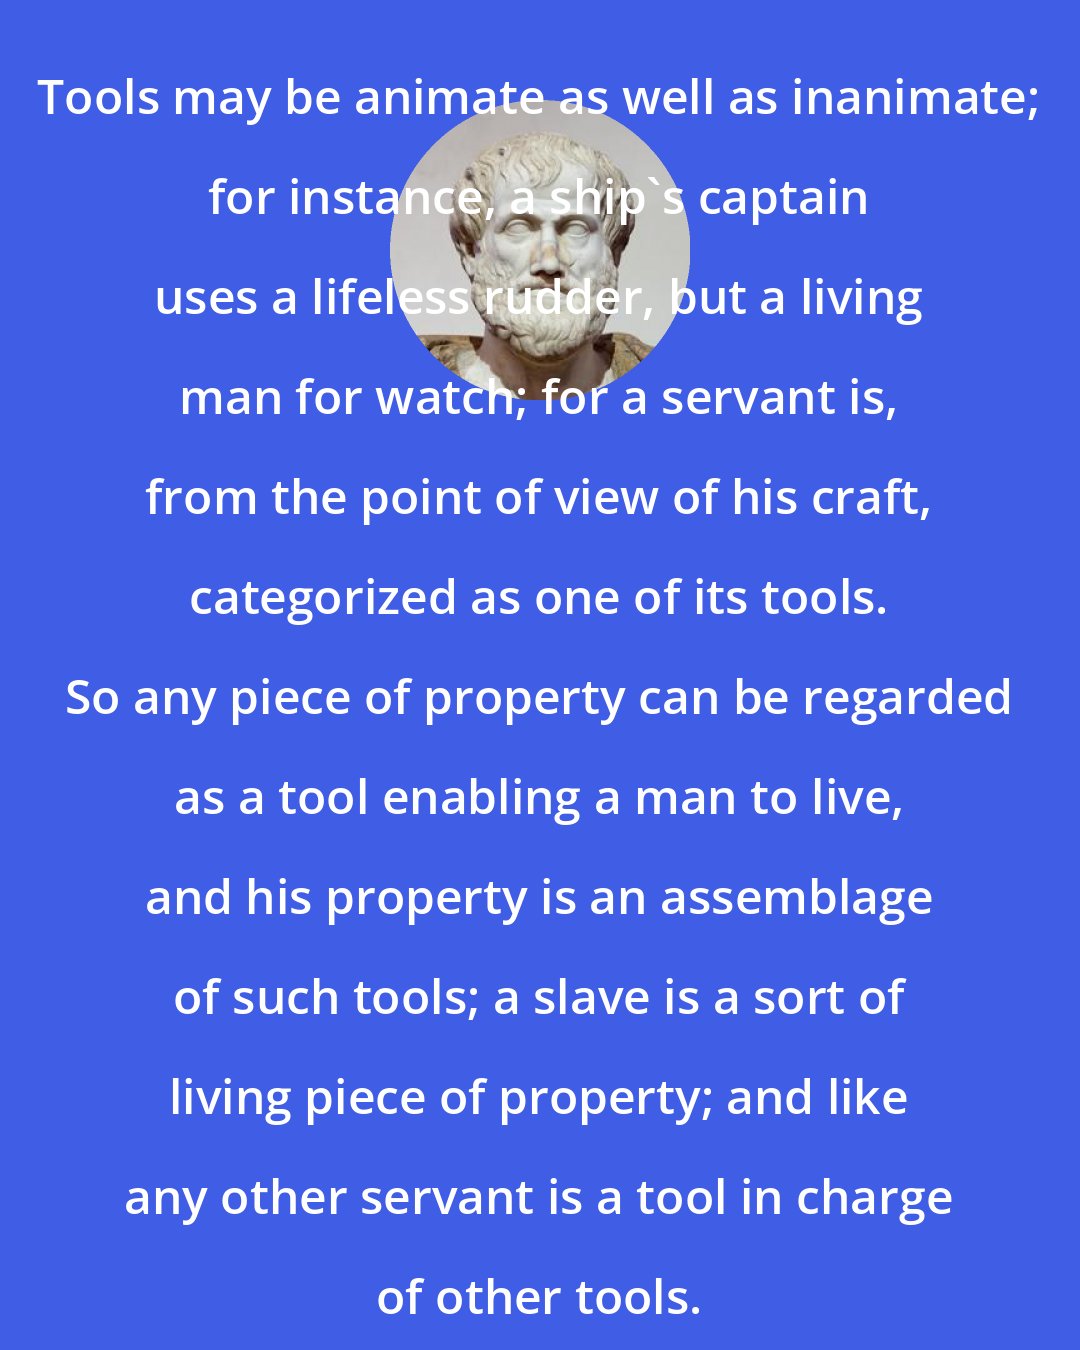 Aristotle: Tools may be animate as well as inanimate; for instance, a ship's captain uses a lifeless rudder, but a living man for watch; for a servant is, from the point of view of his craft, categorized as one of its tools. So any piece of property can be regarded as a tool enabling a man to live, and his property is an assemblage of such tools; a slave is a sort of living piece of property; and like any other servant is a tool in charge of other tools.